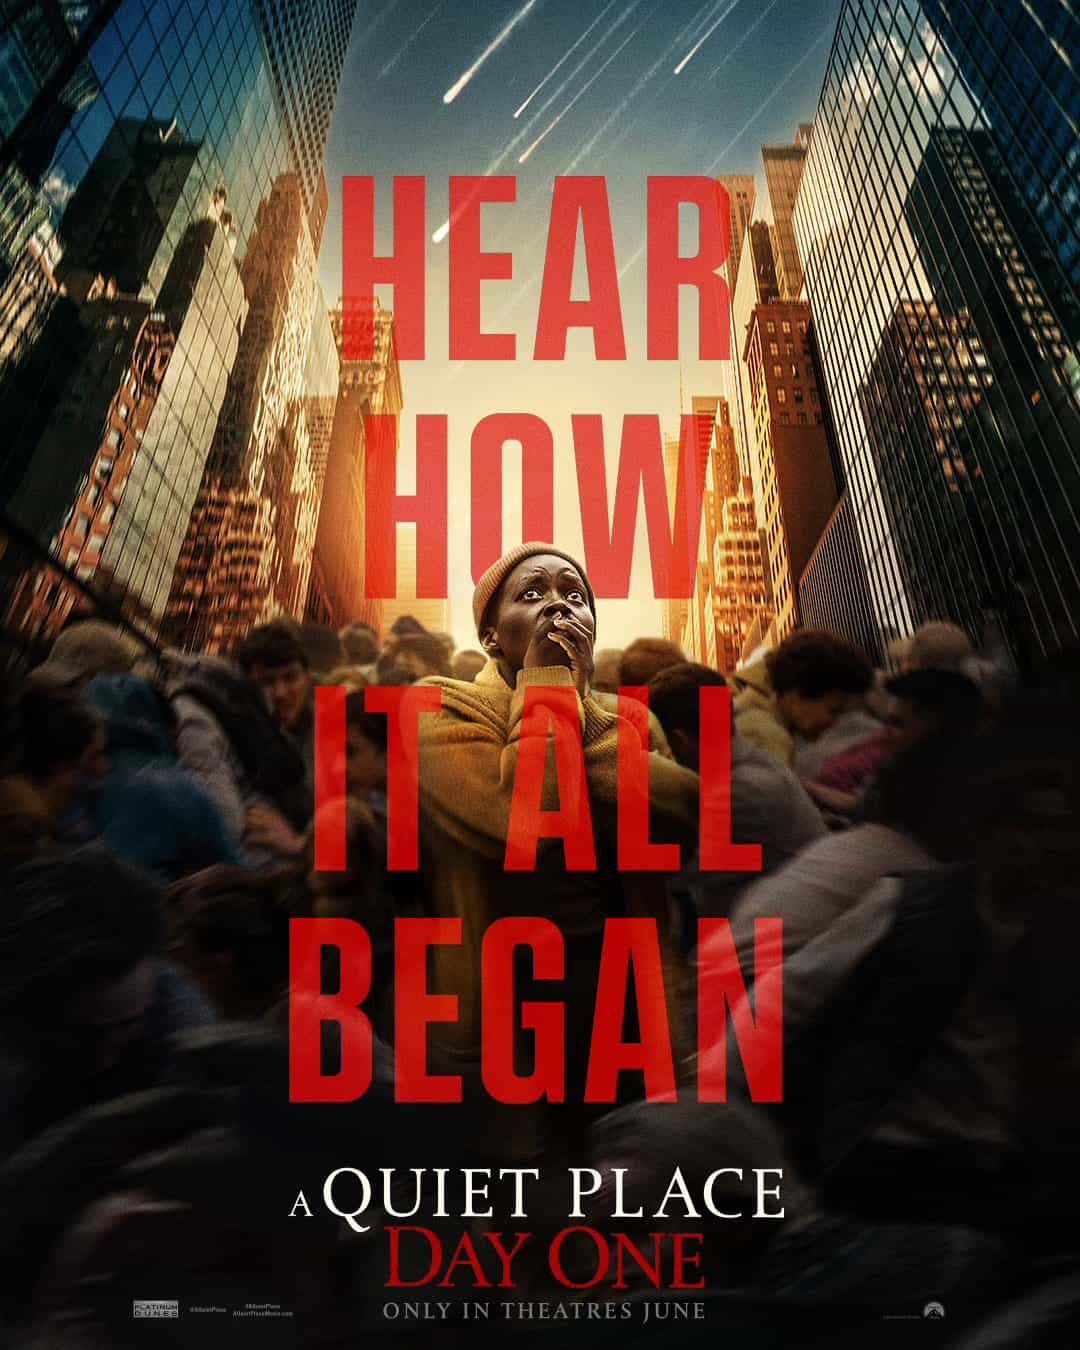 Check out the new trailer and poster for upcoming movie A Quiet Place: Day One which stars Lupita Nyong